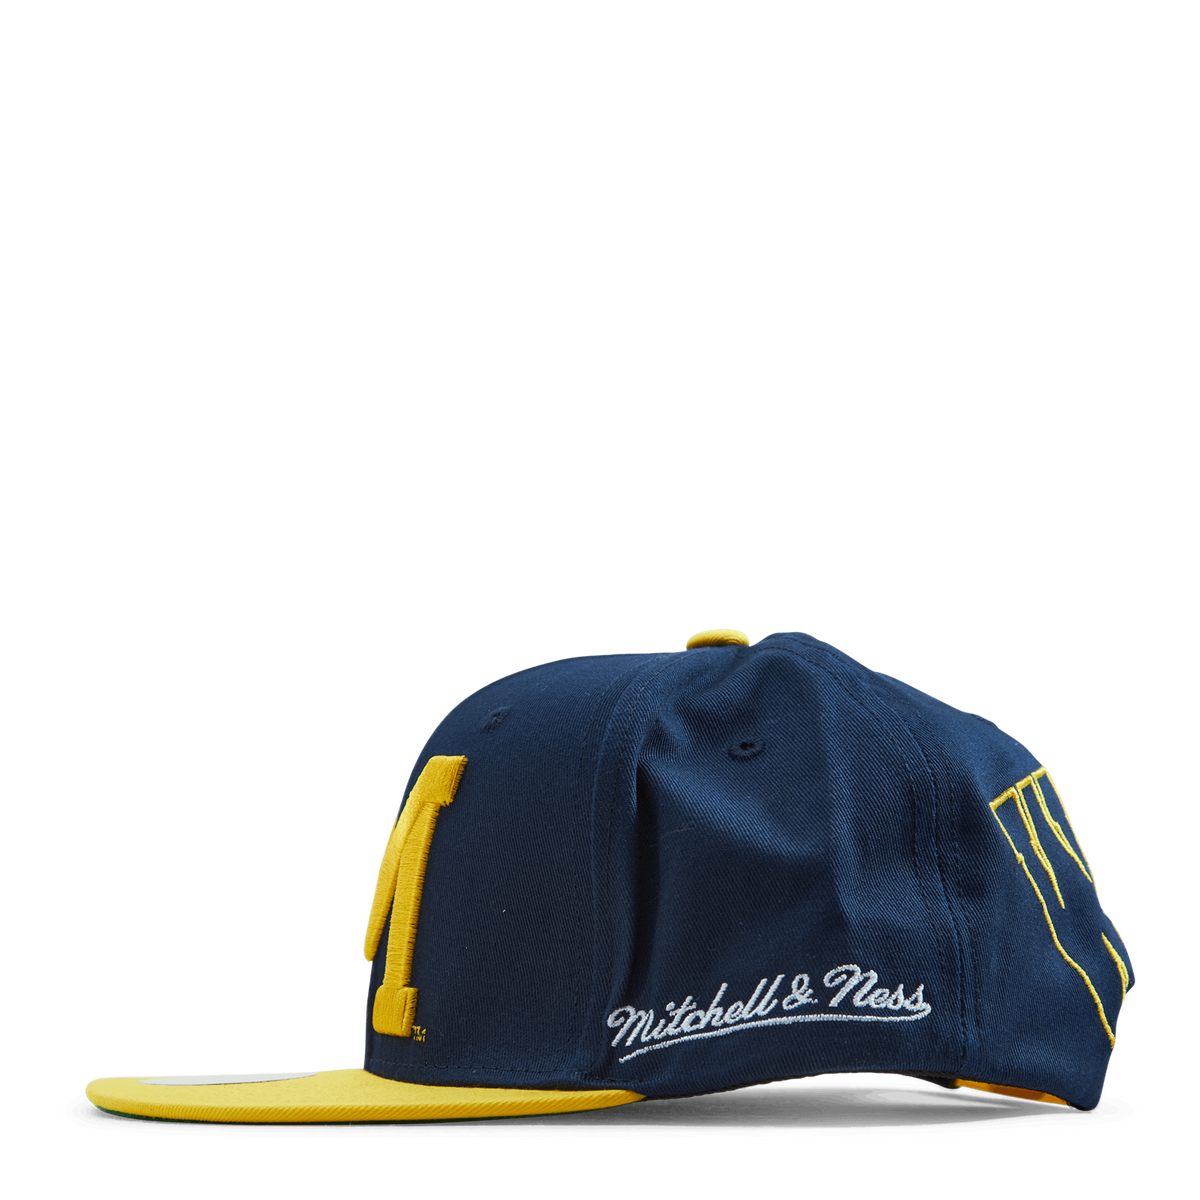 Michigan Back In Action Snapback